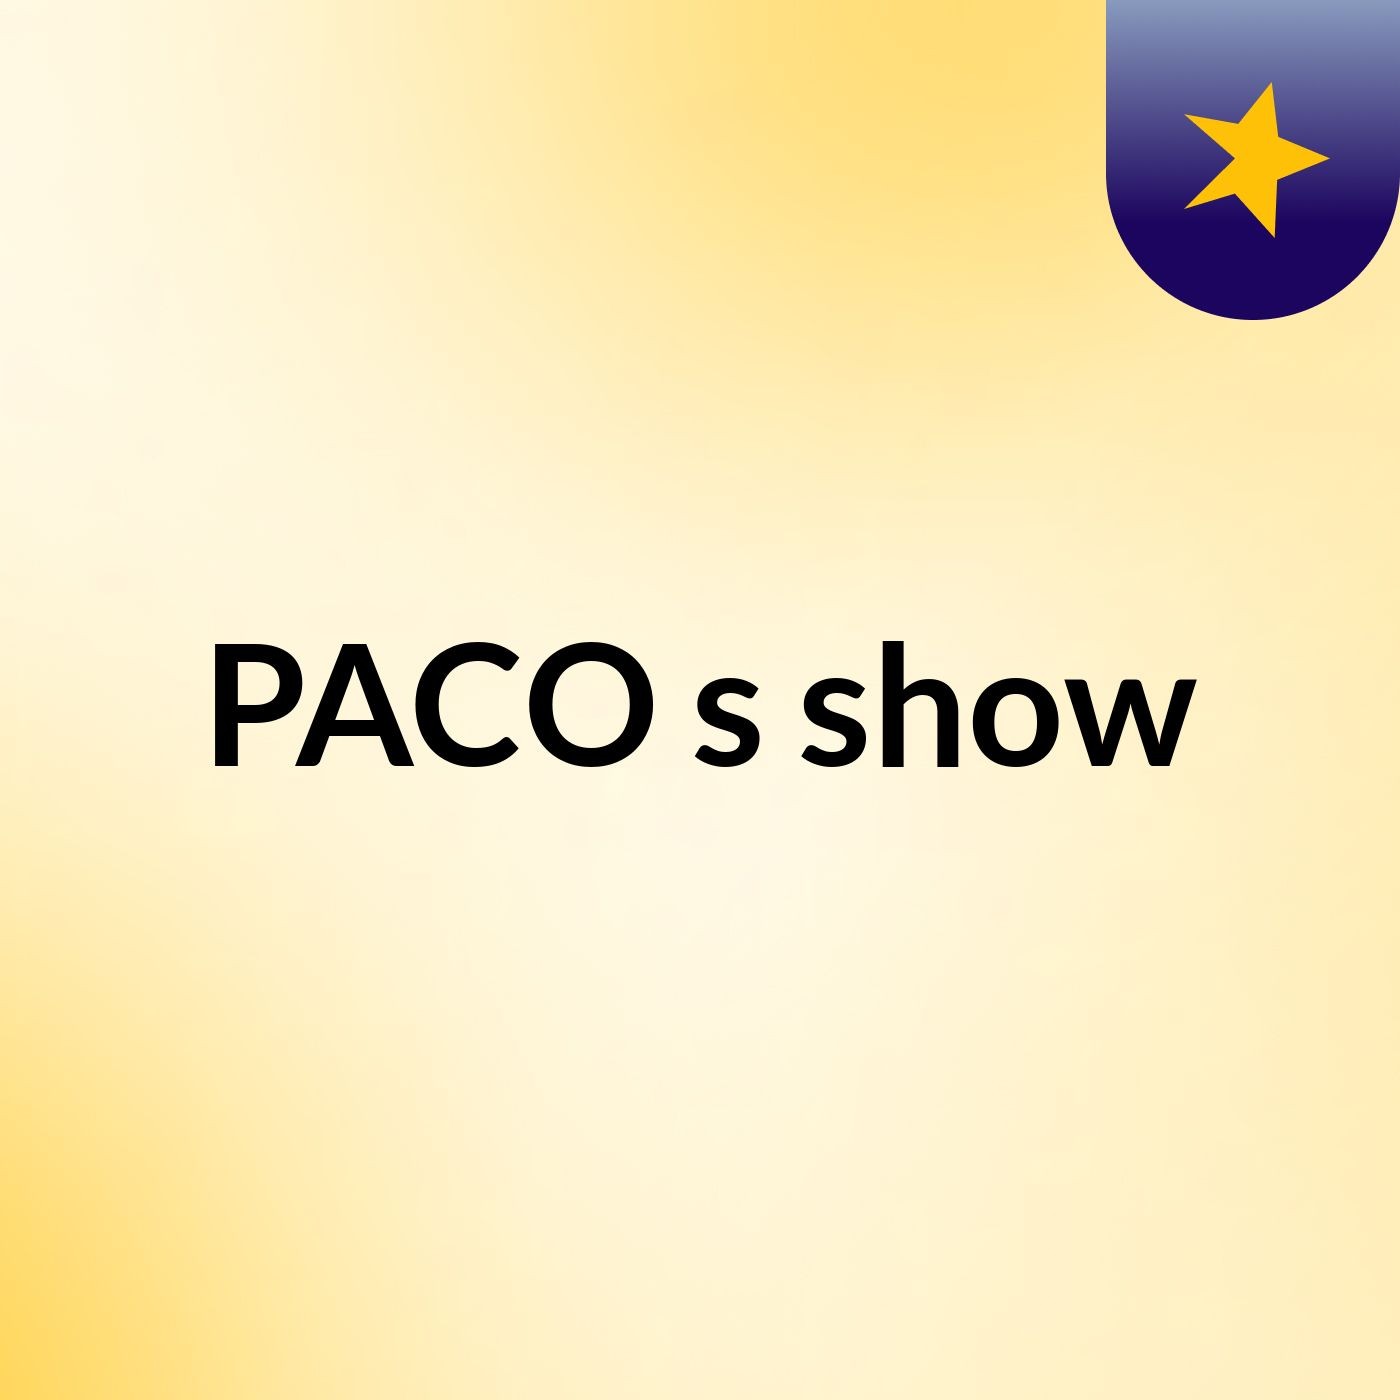 PACO's show